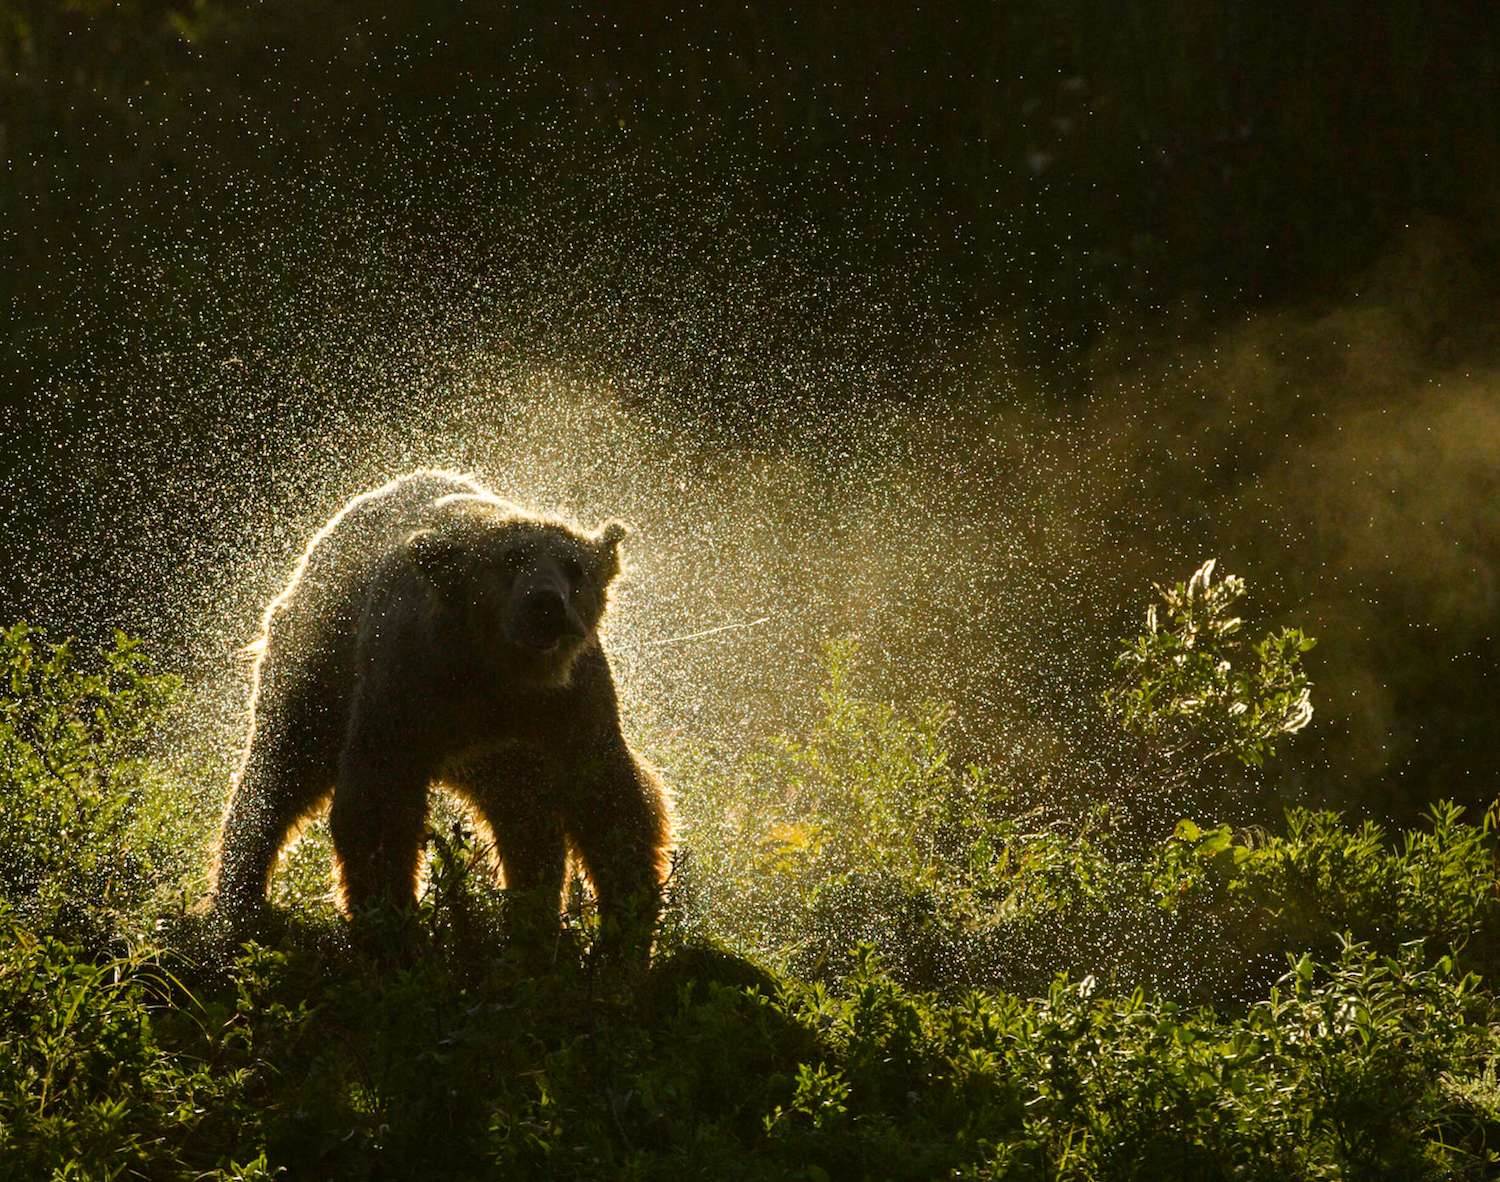 A brown bear shakes off water droplets after a day of fishing.